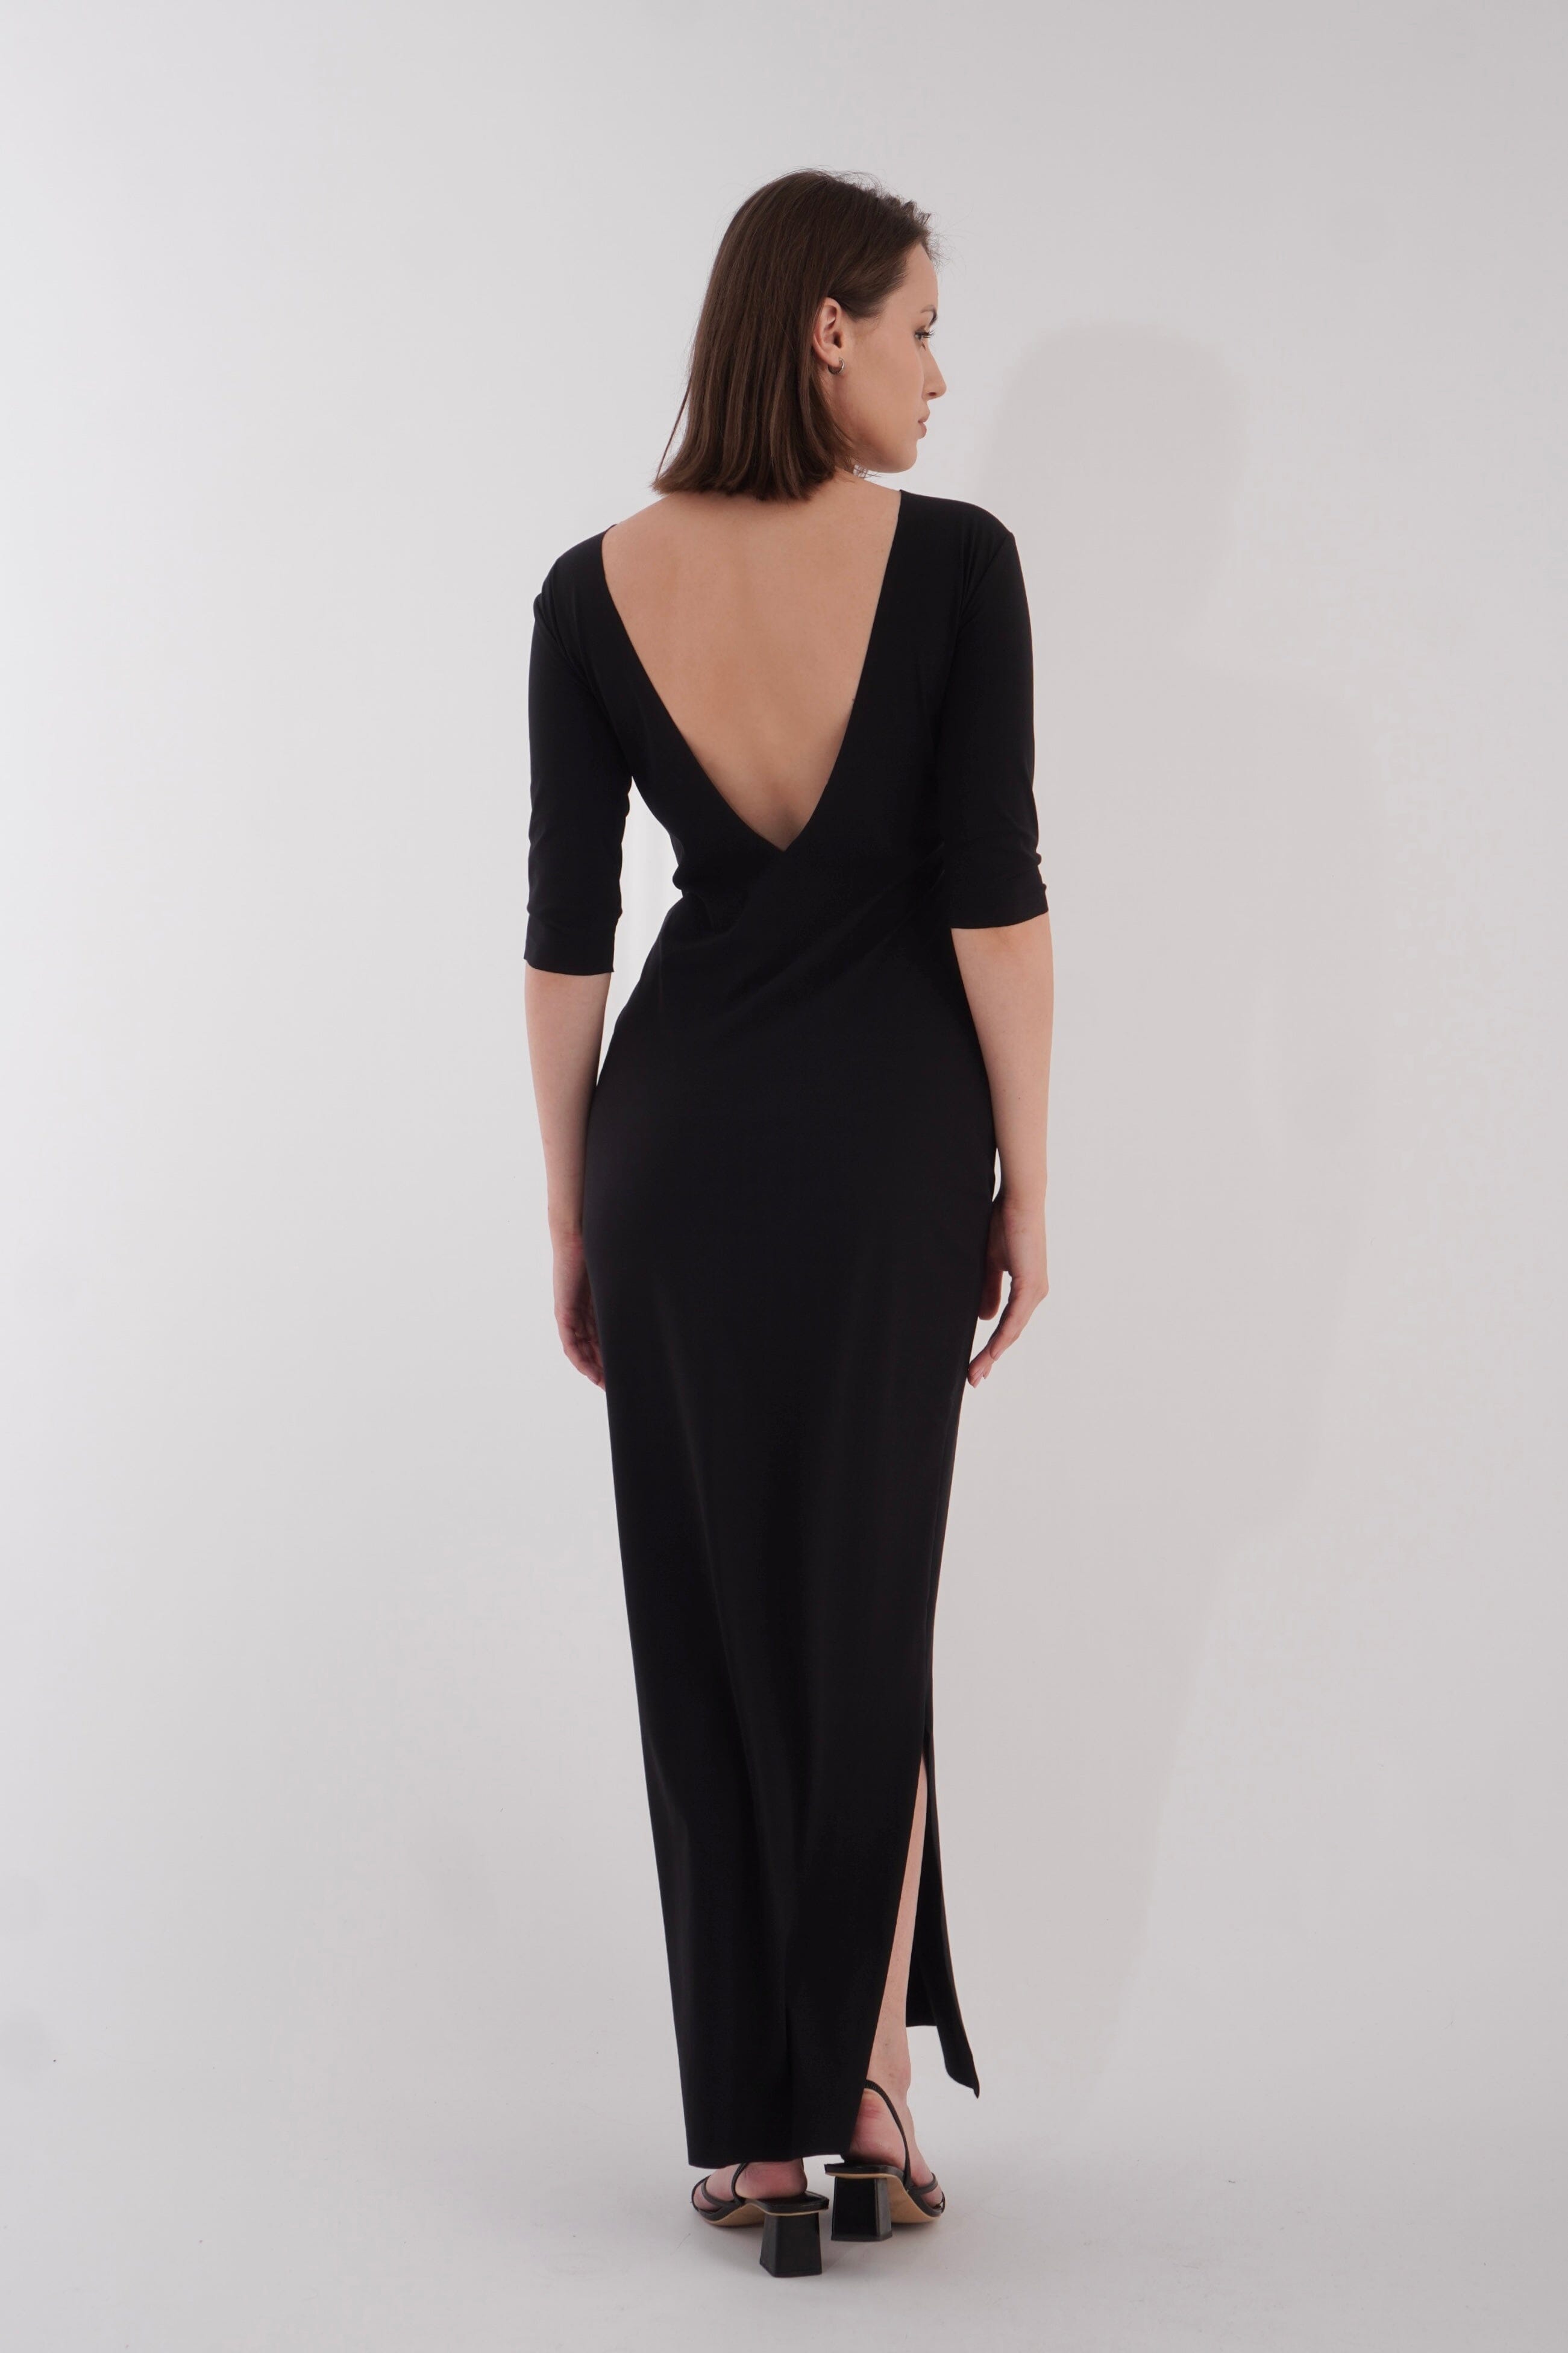  Silent Flame Dress Black Product Amoralle